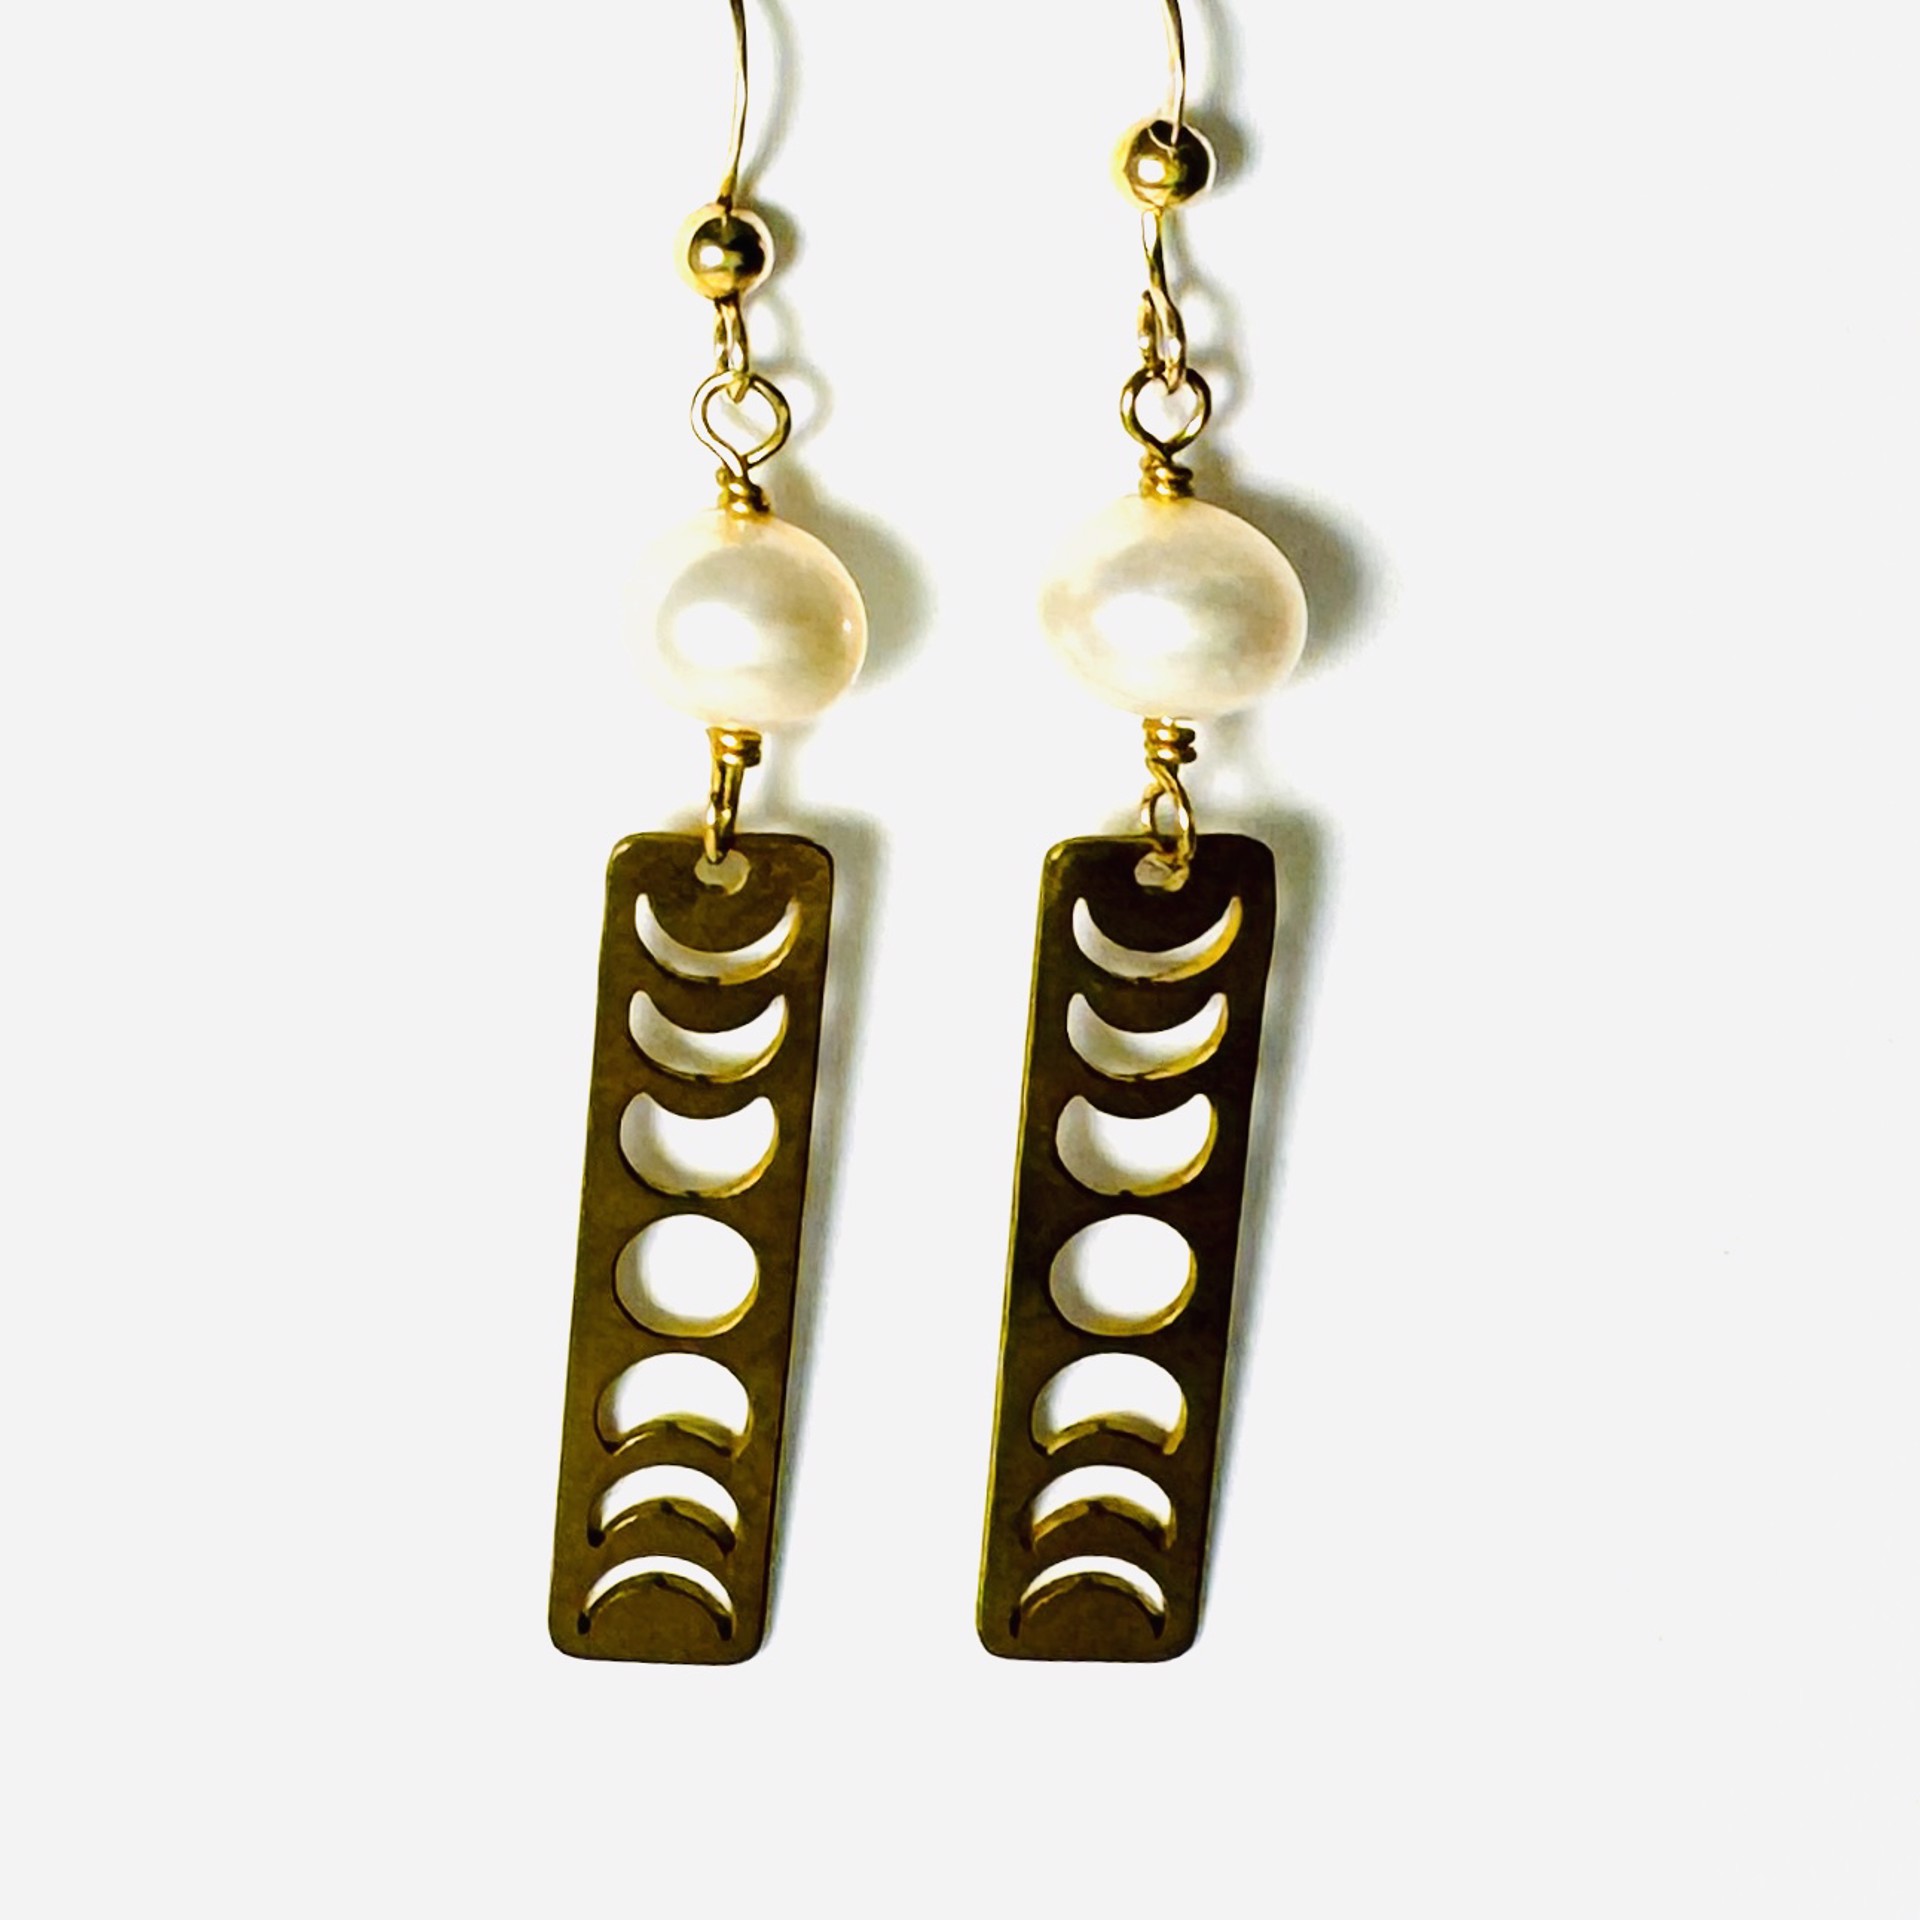 Pearl, Phases ofthe Moon  Brass Earrings LR24-22 by Legare Riano